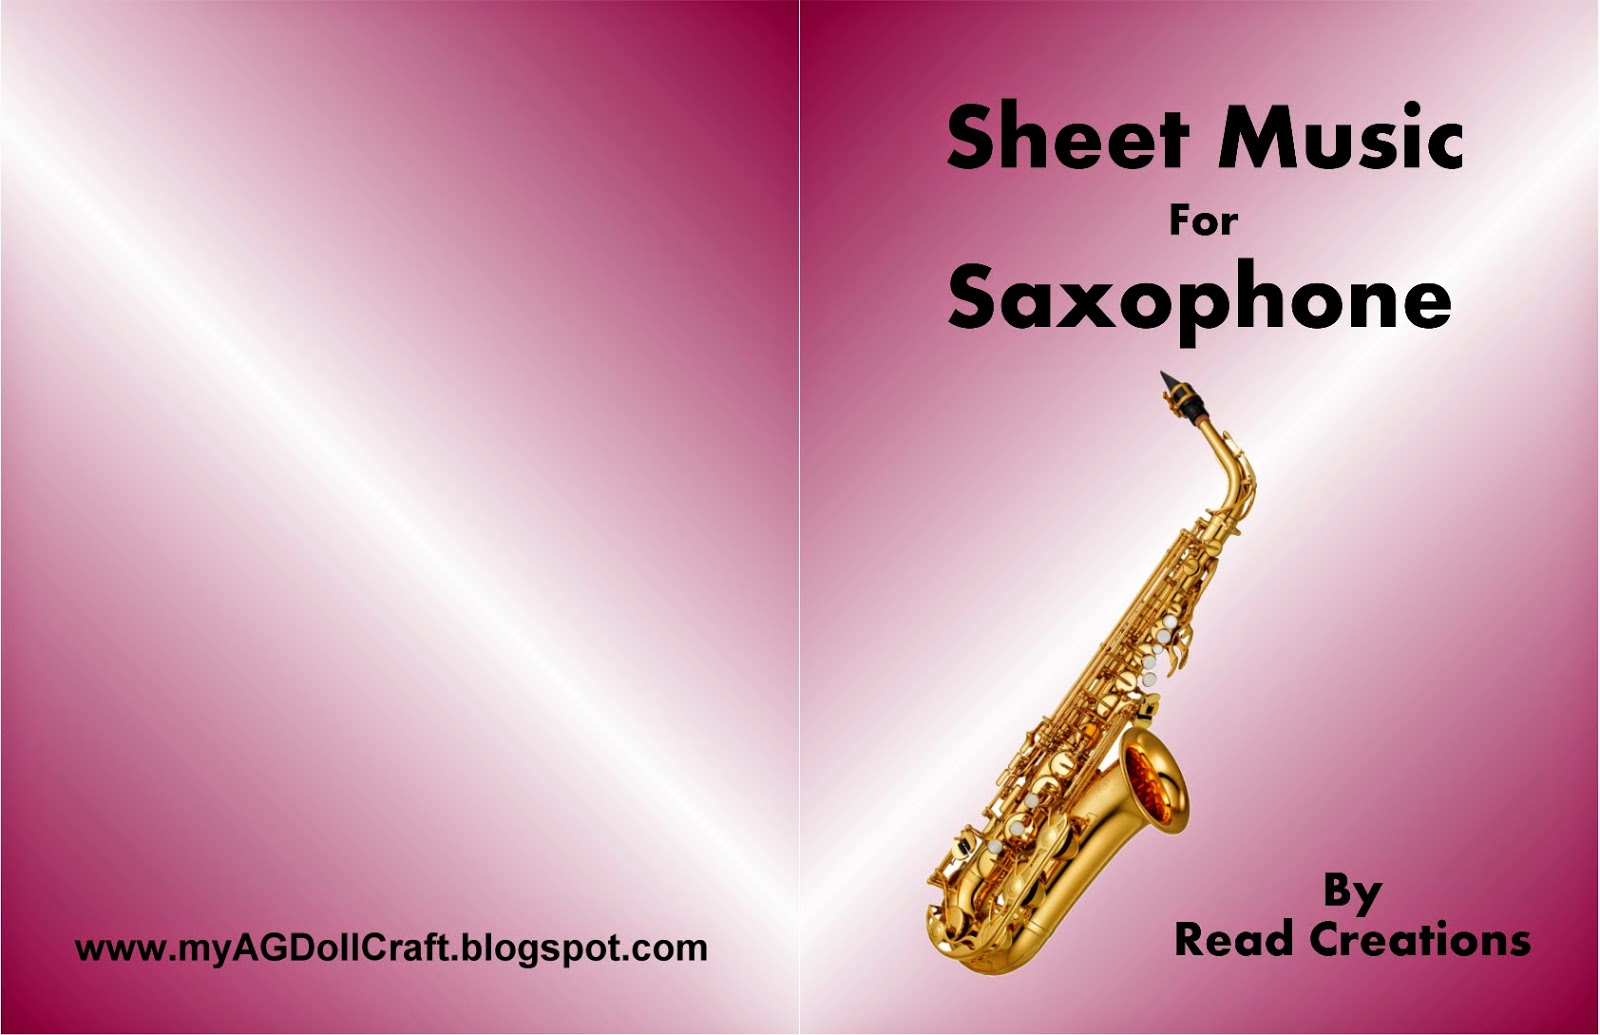 Saxophone book cover